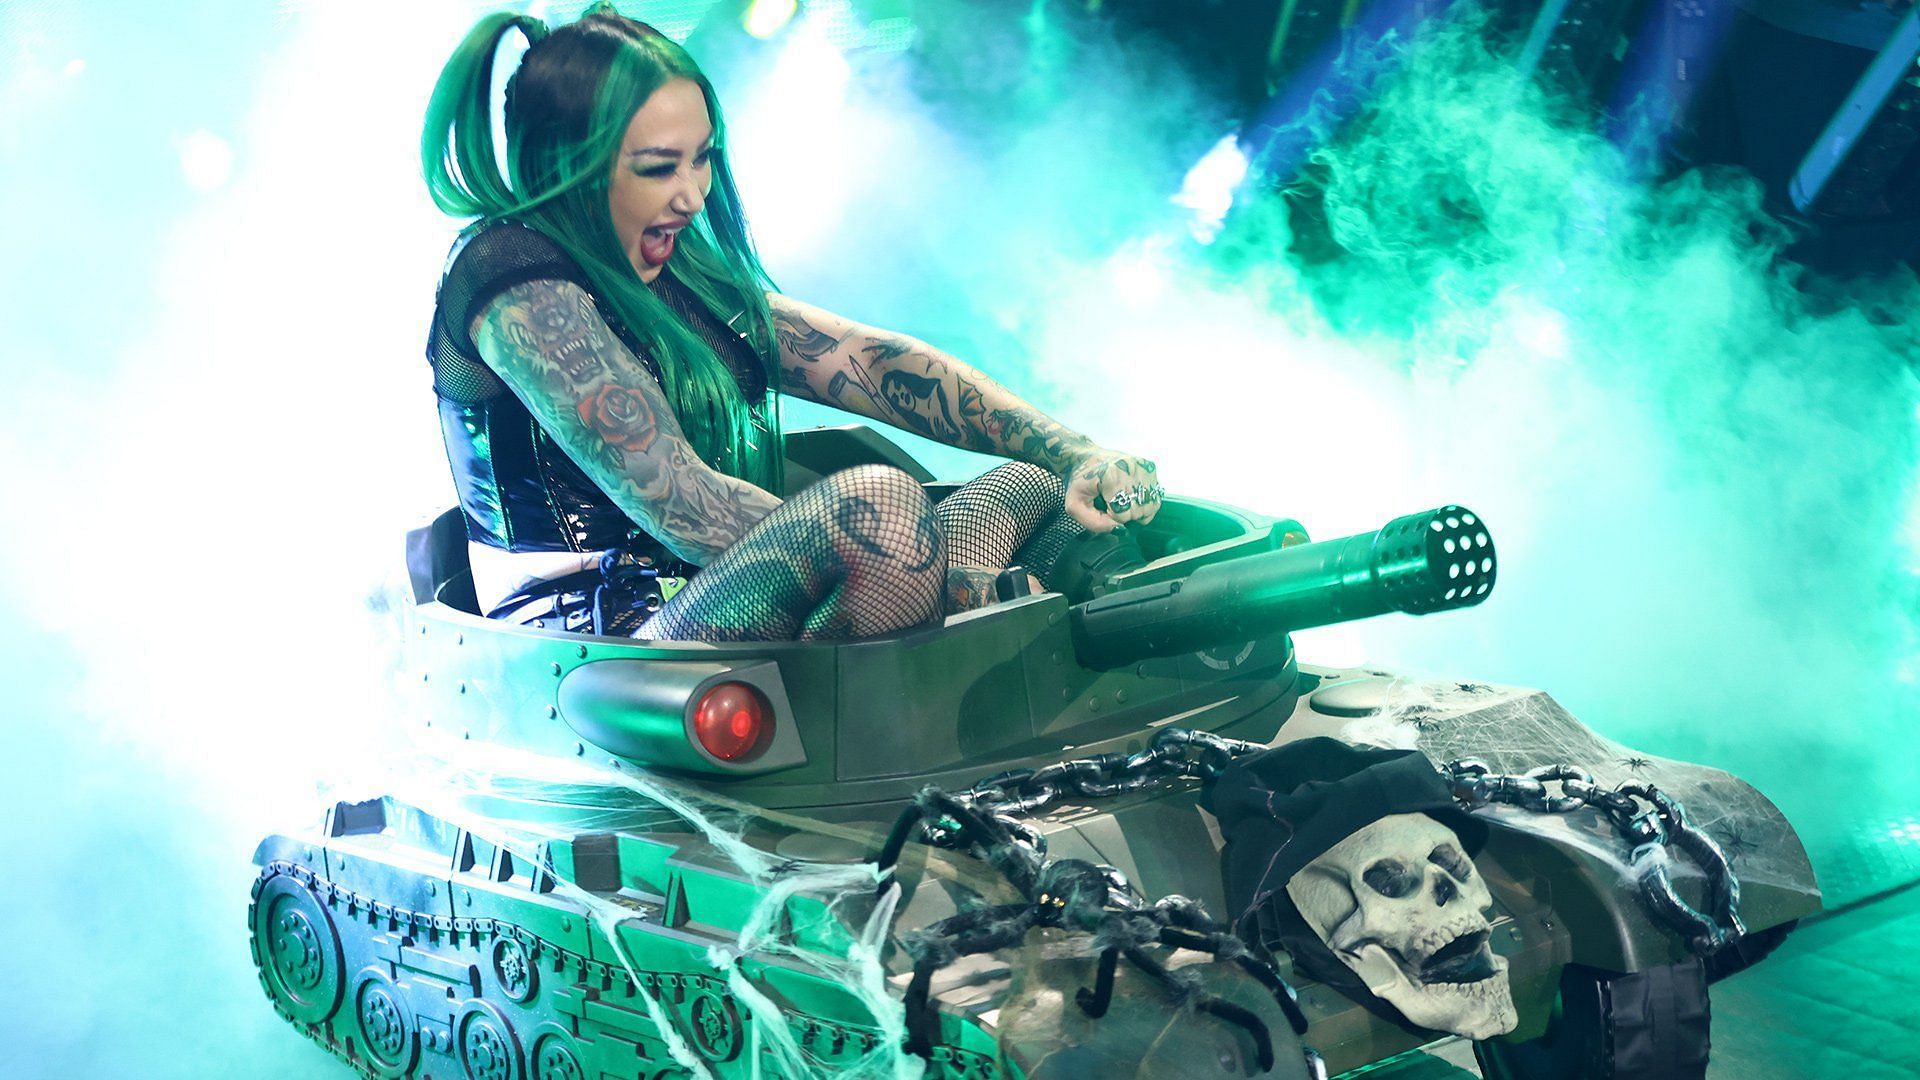 Shotzi makes her way to the WWE ring in her tank